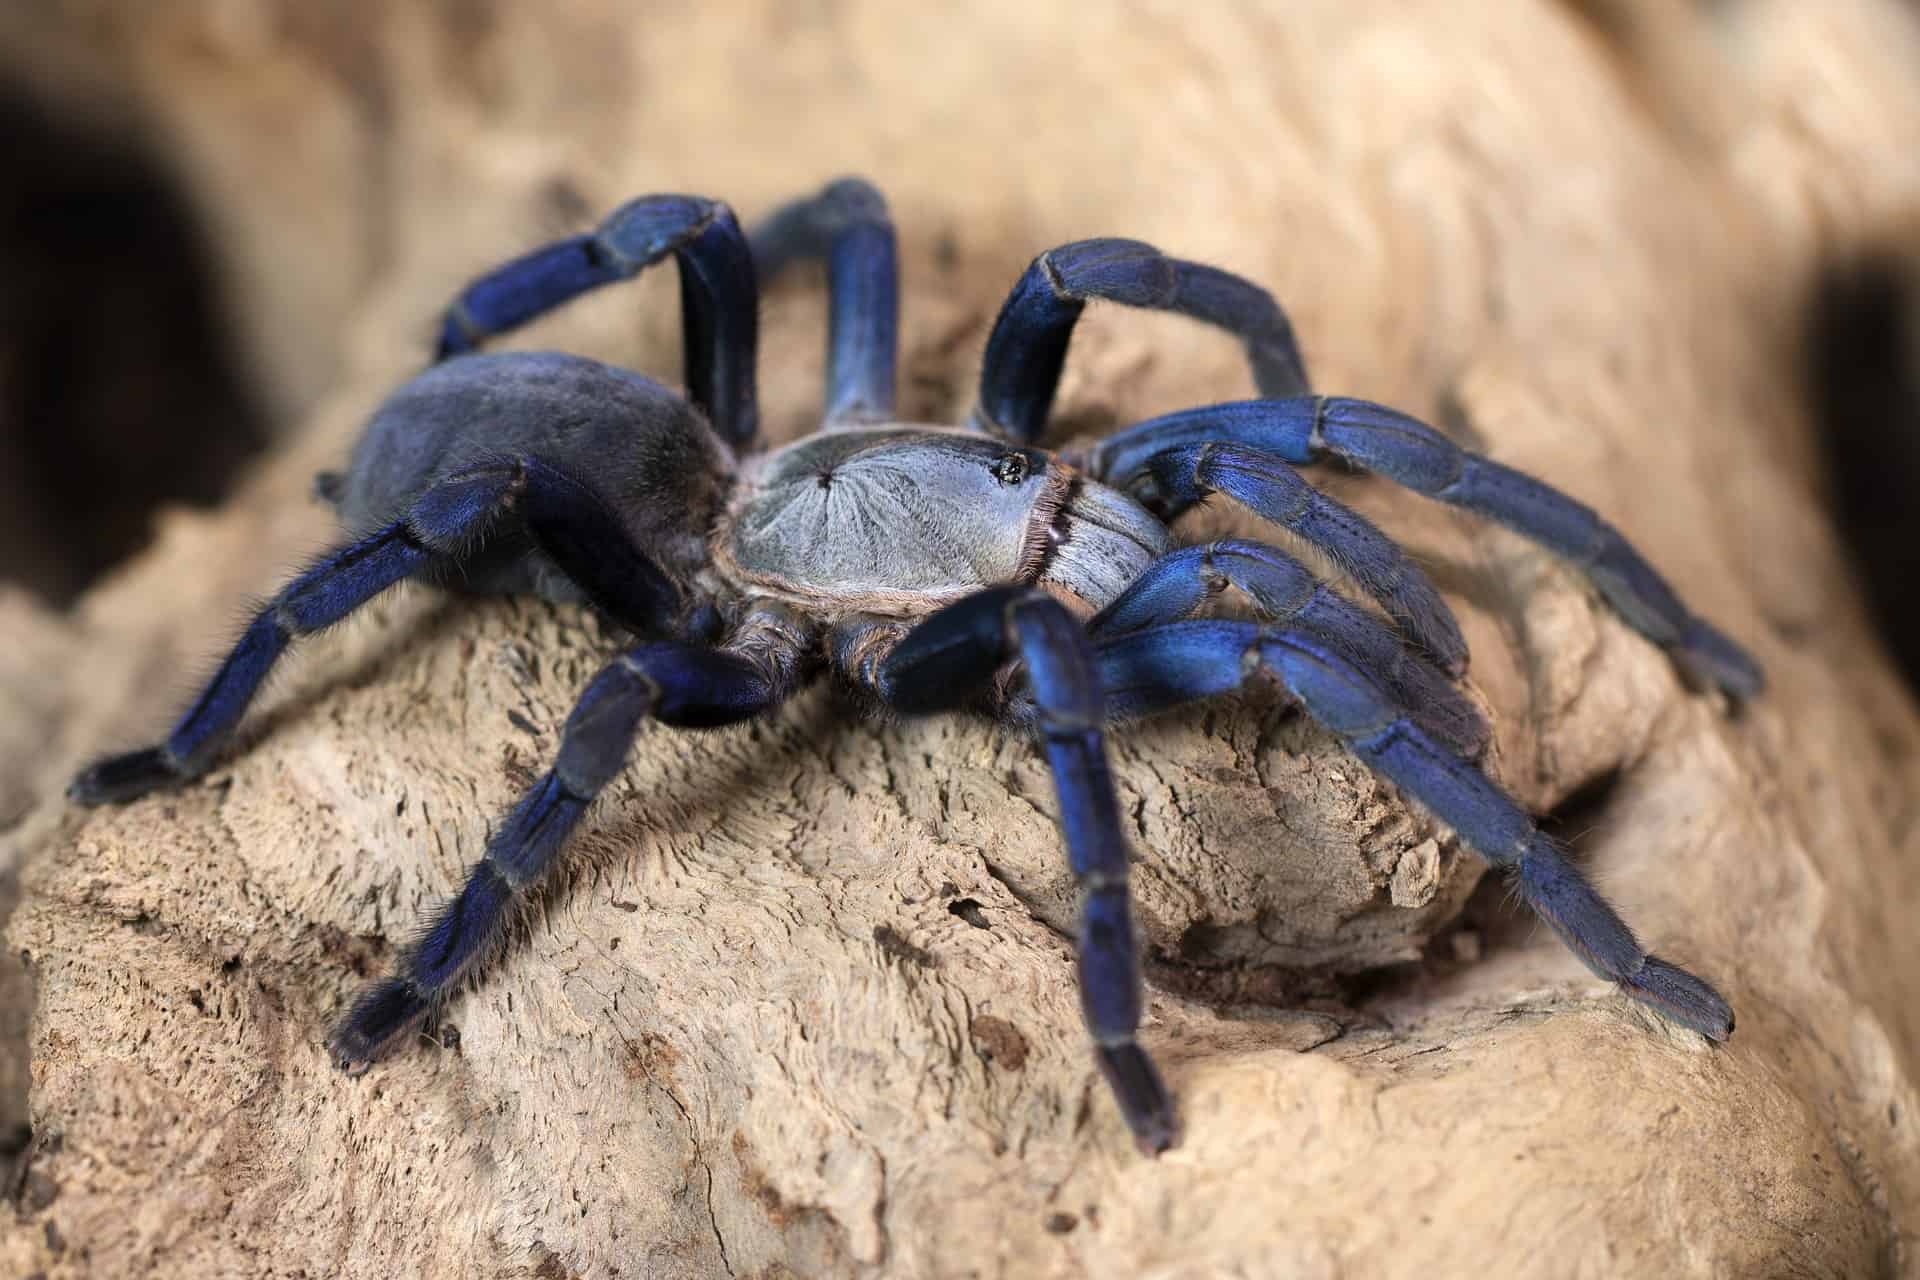 50 Thrilling Tarantula Facts That Are Too Big To Miss